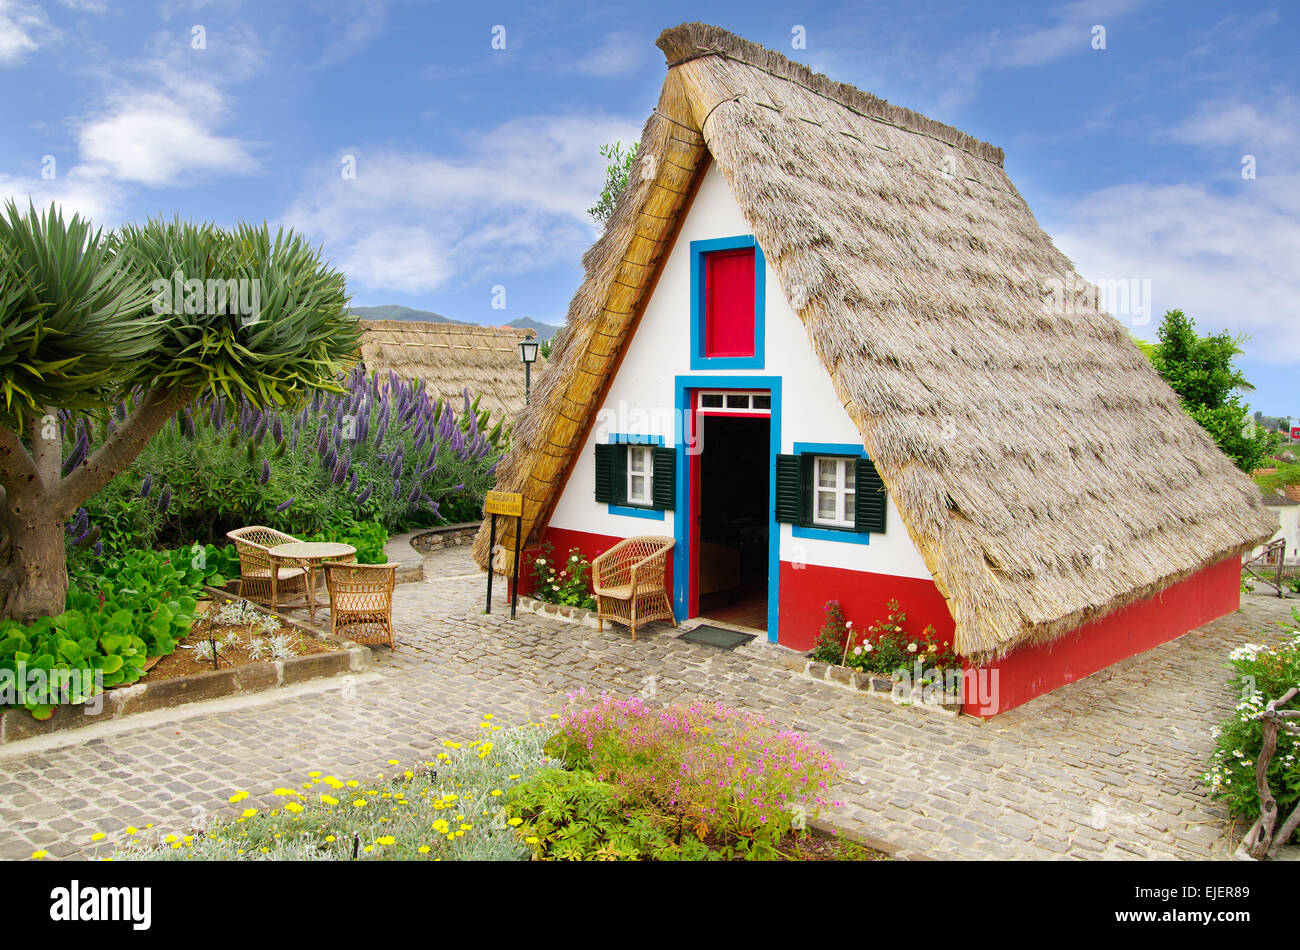 Typical souvernir sweet candy shop house, Madeira Stock Photo